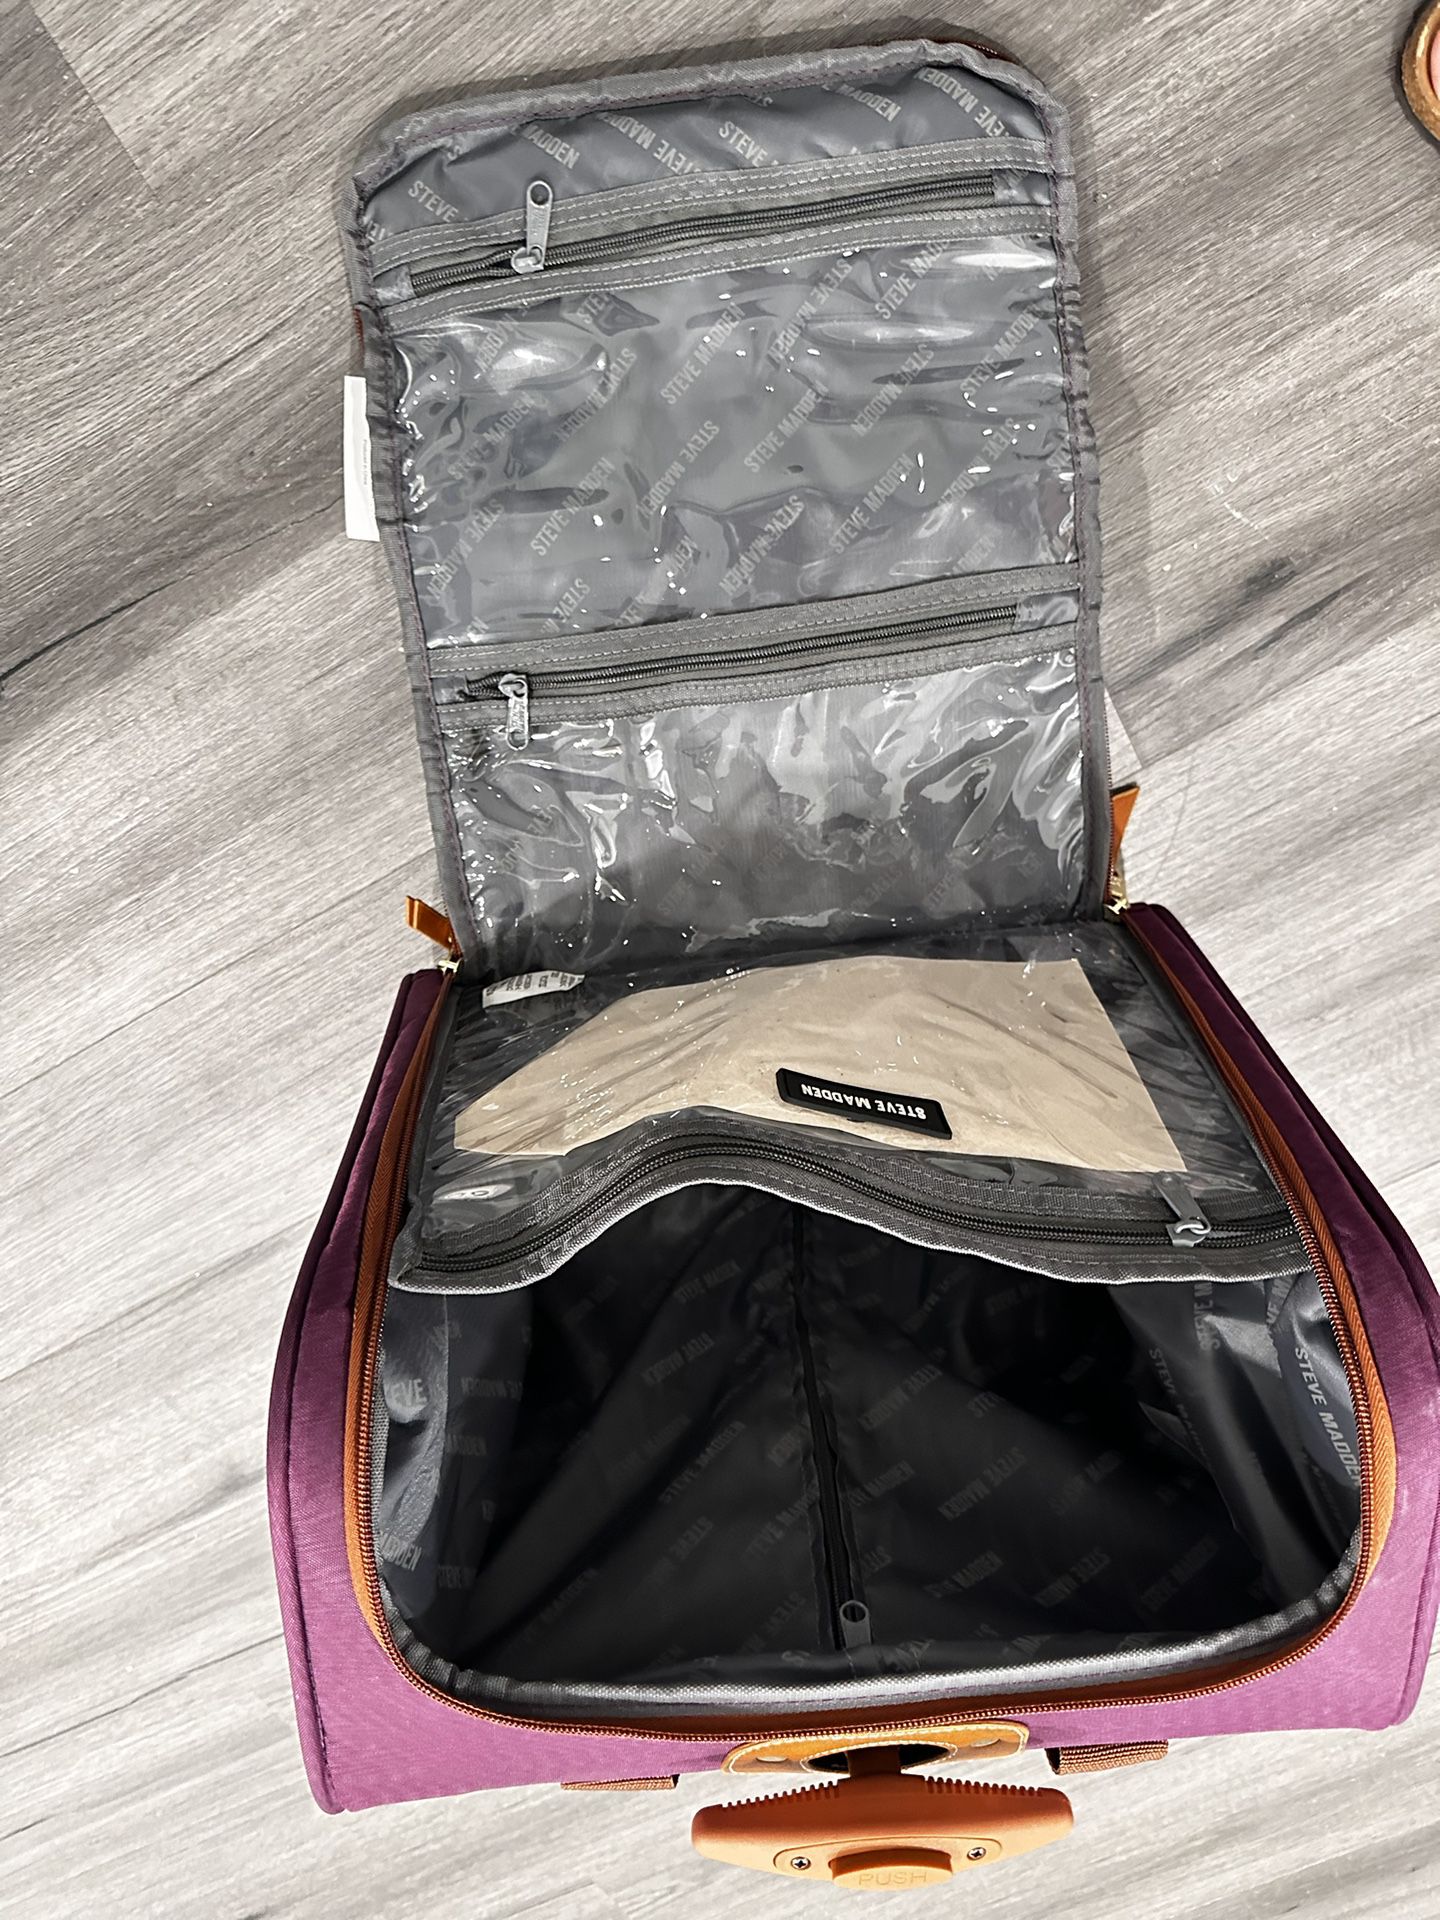 steve madden duffle for Sale in Duluth, GA - OfferUp